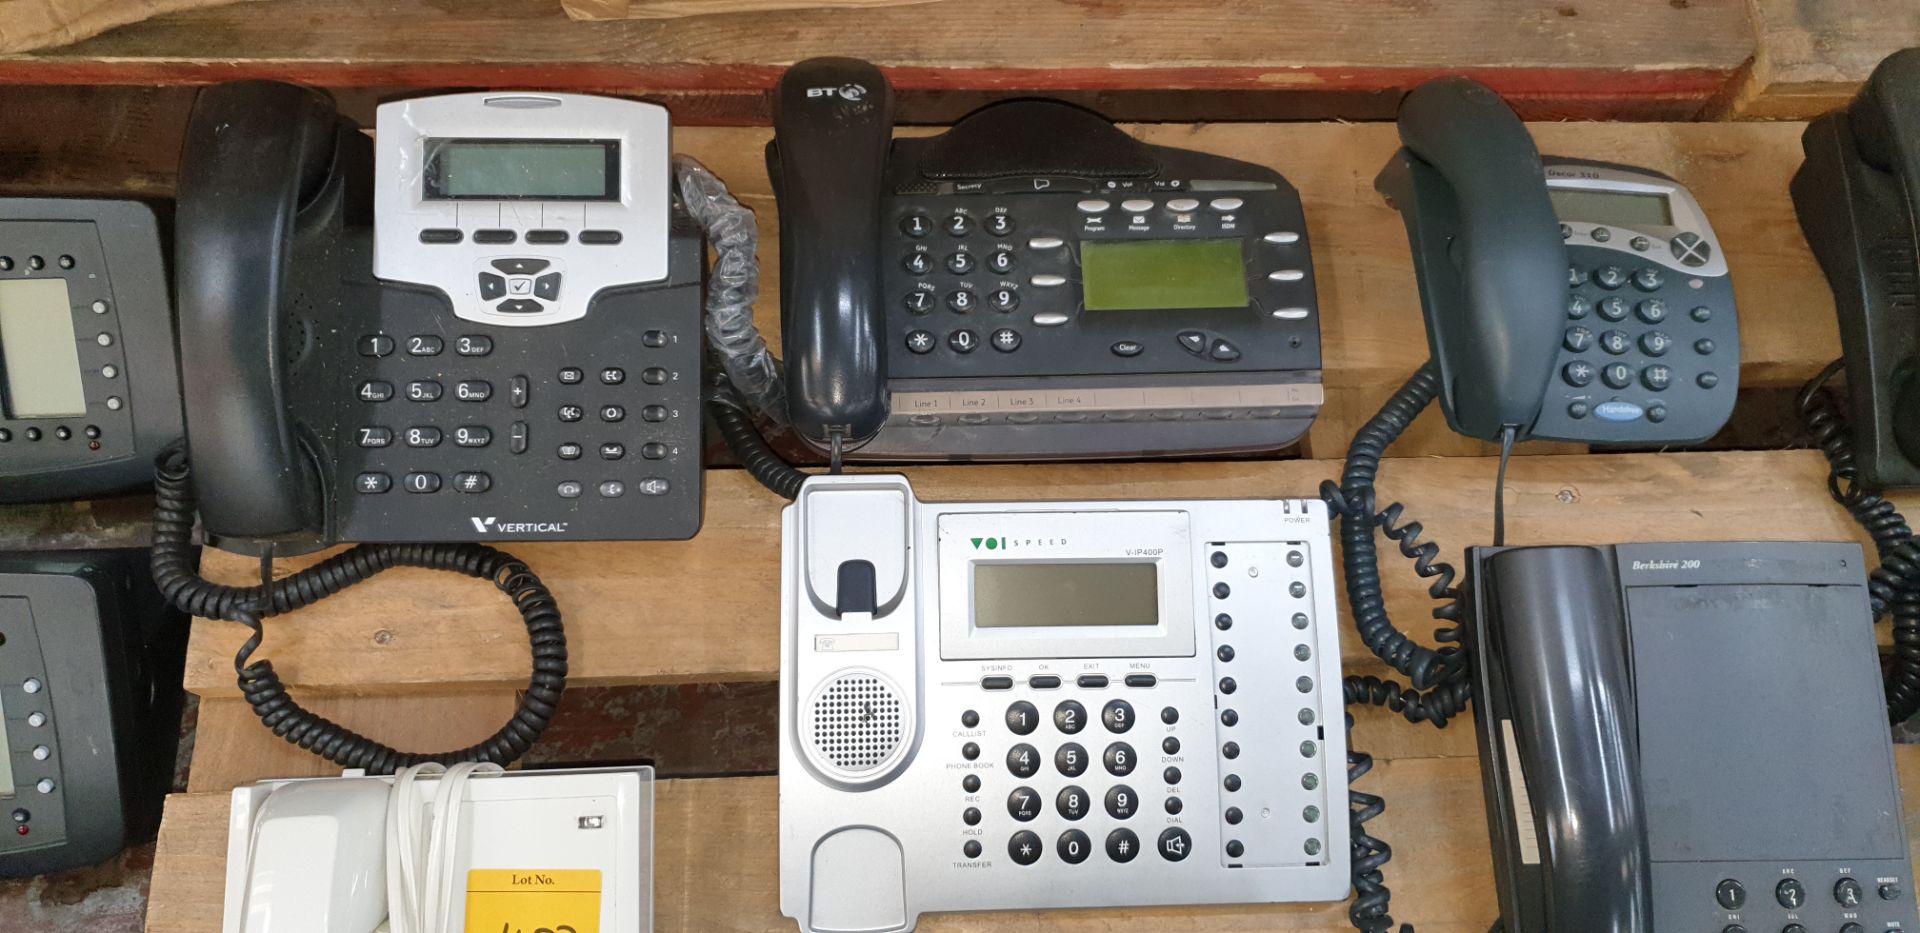 16 off assorted telephone handsets by Polycom, Cisco, Splicecom, Nortel & others - Image 5 of 8